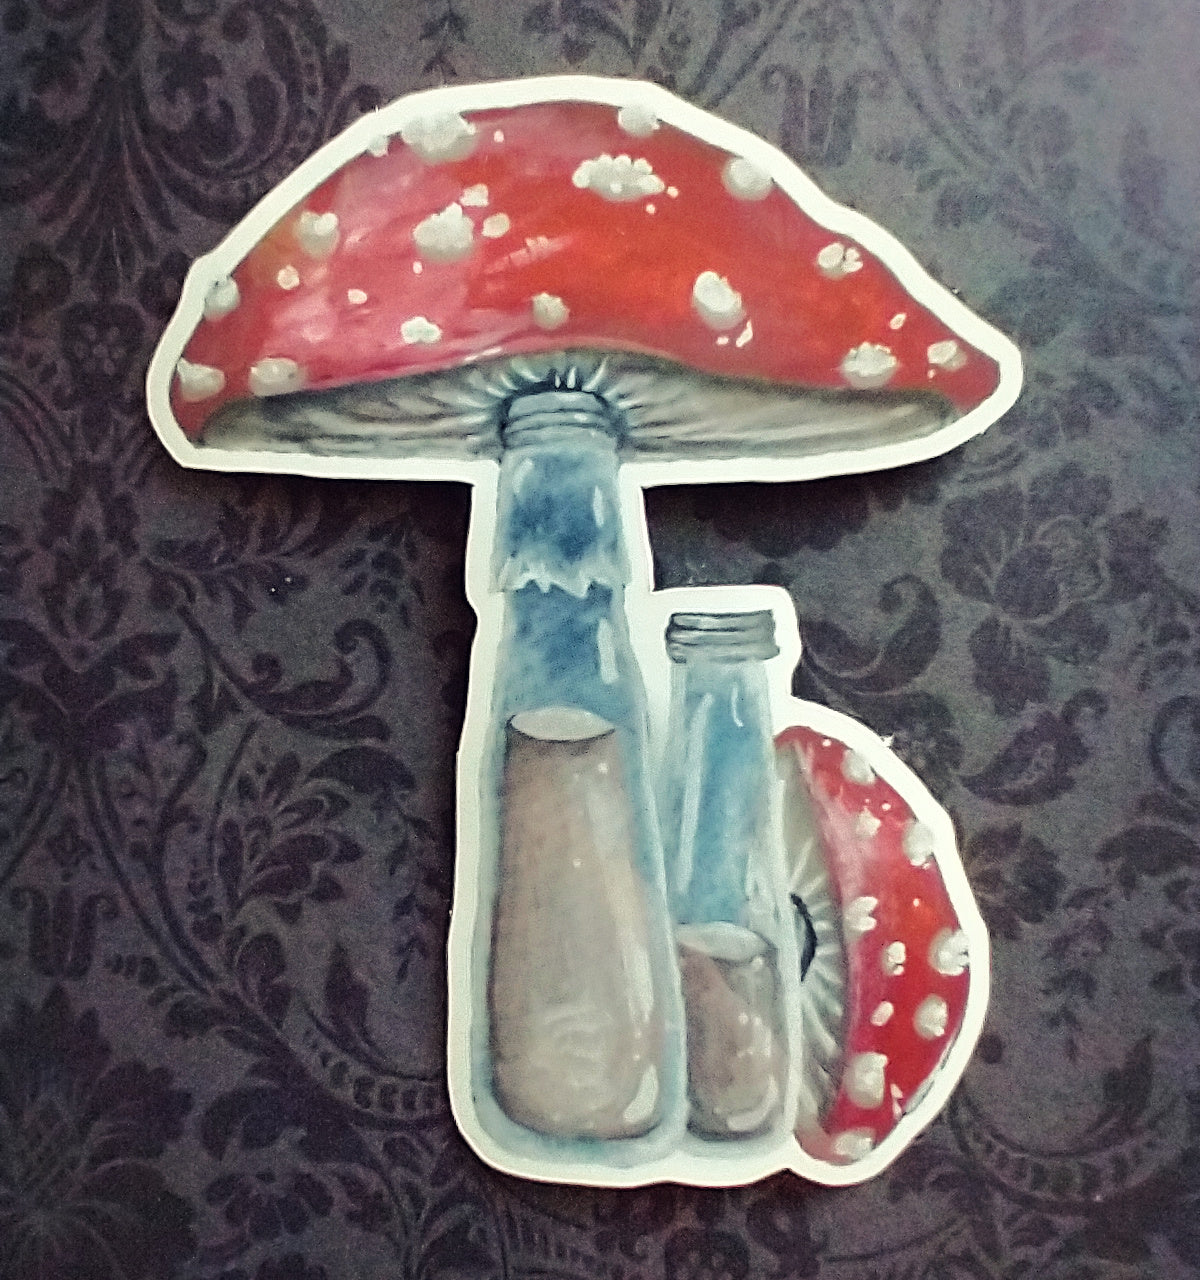 A sticker of a large milk bottle topped with a mushroom cap that's red with white spots. Another similar bottle sits next to it, this one with its cap removed and set alongside.